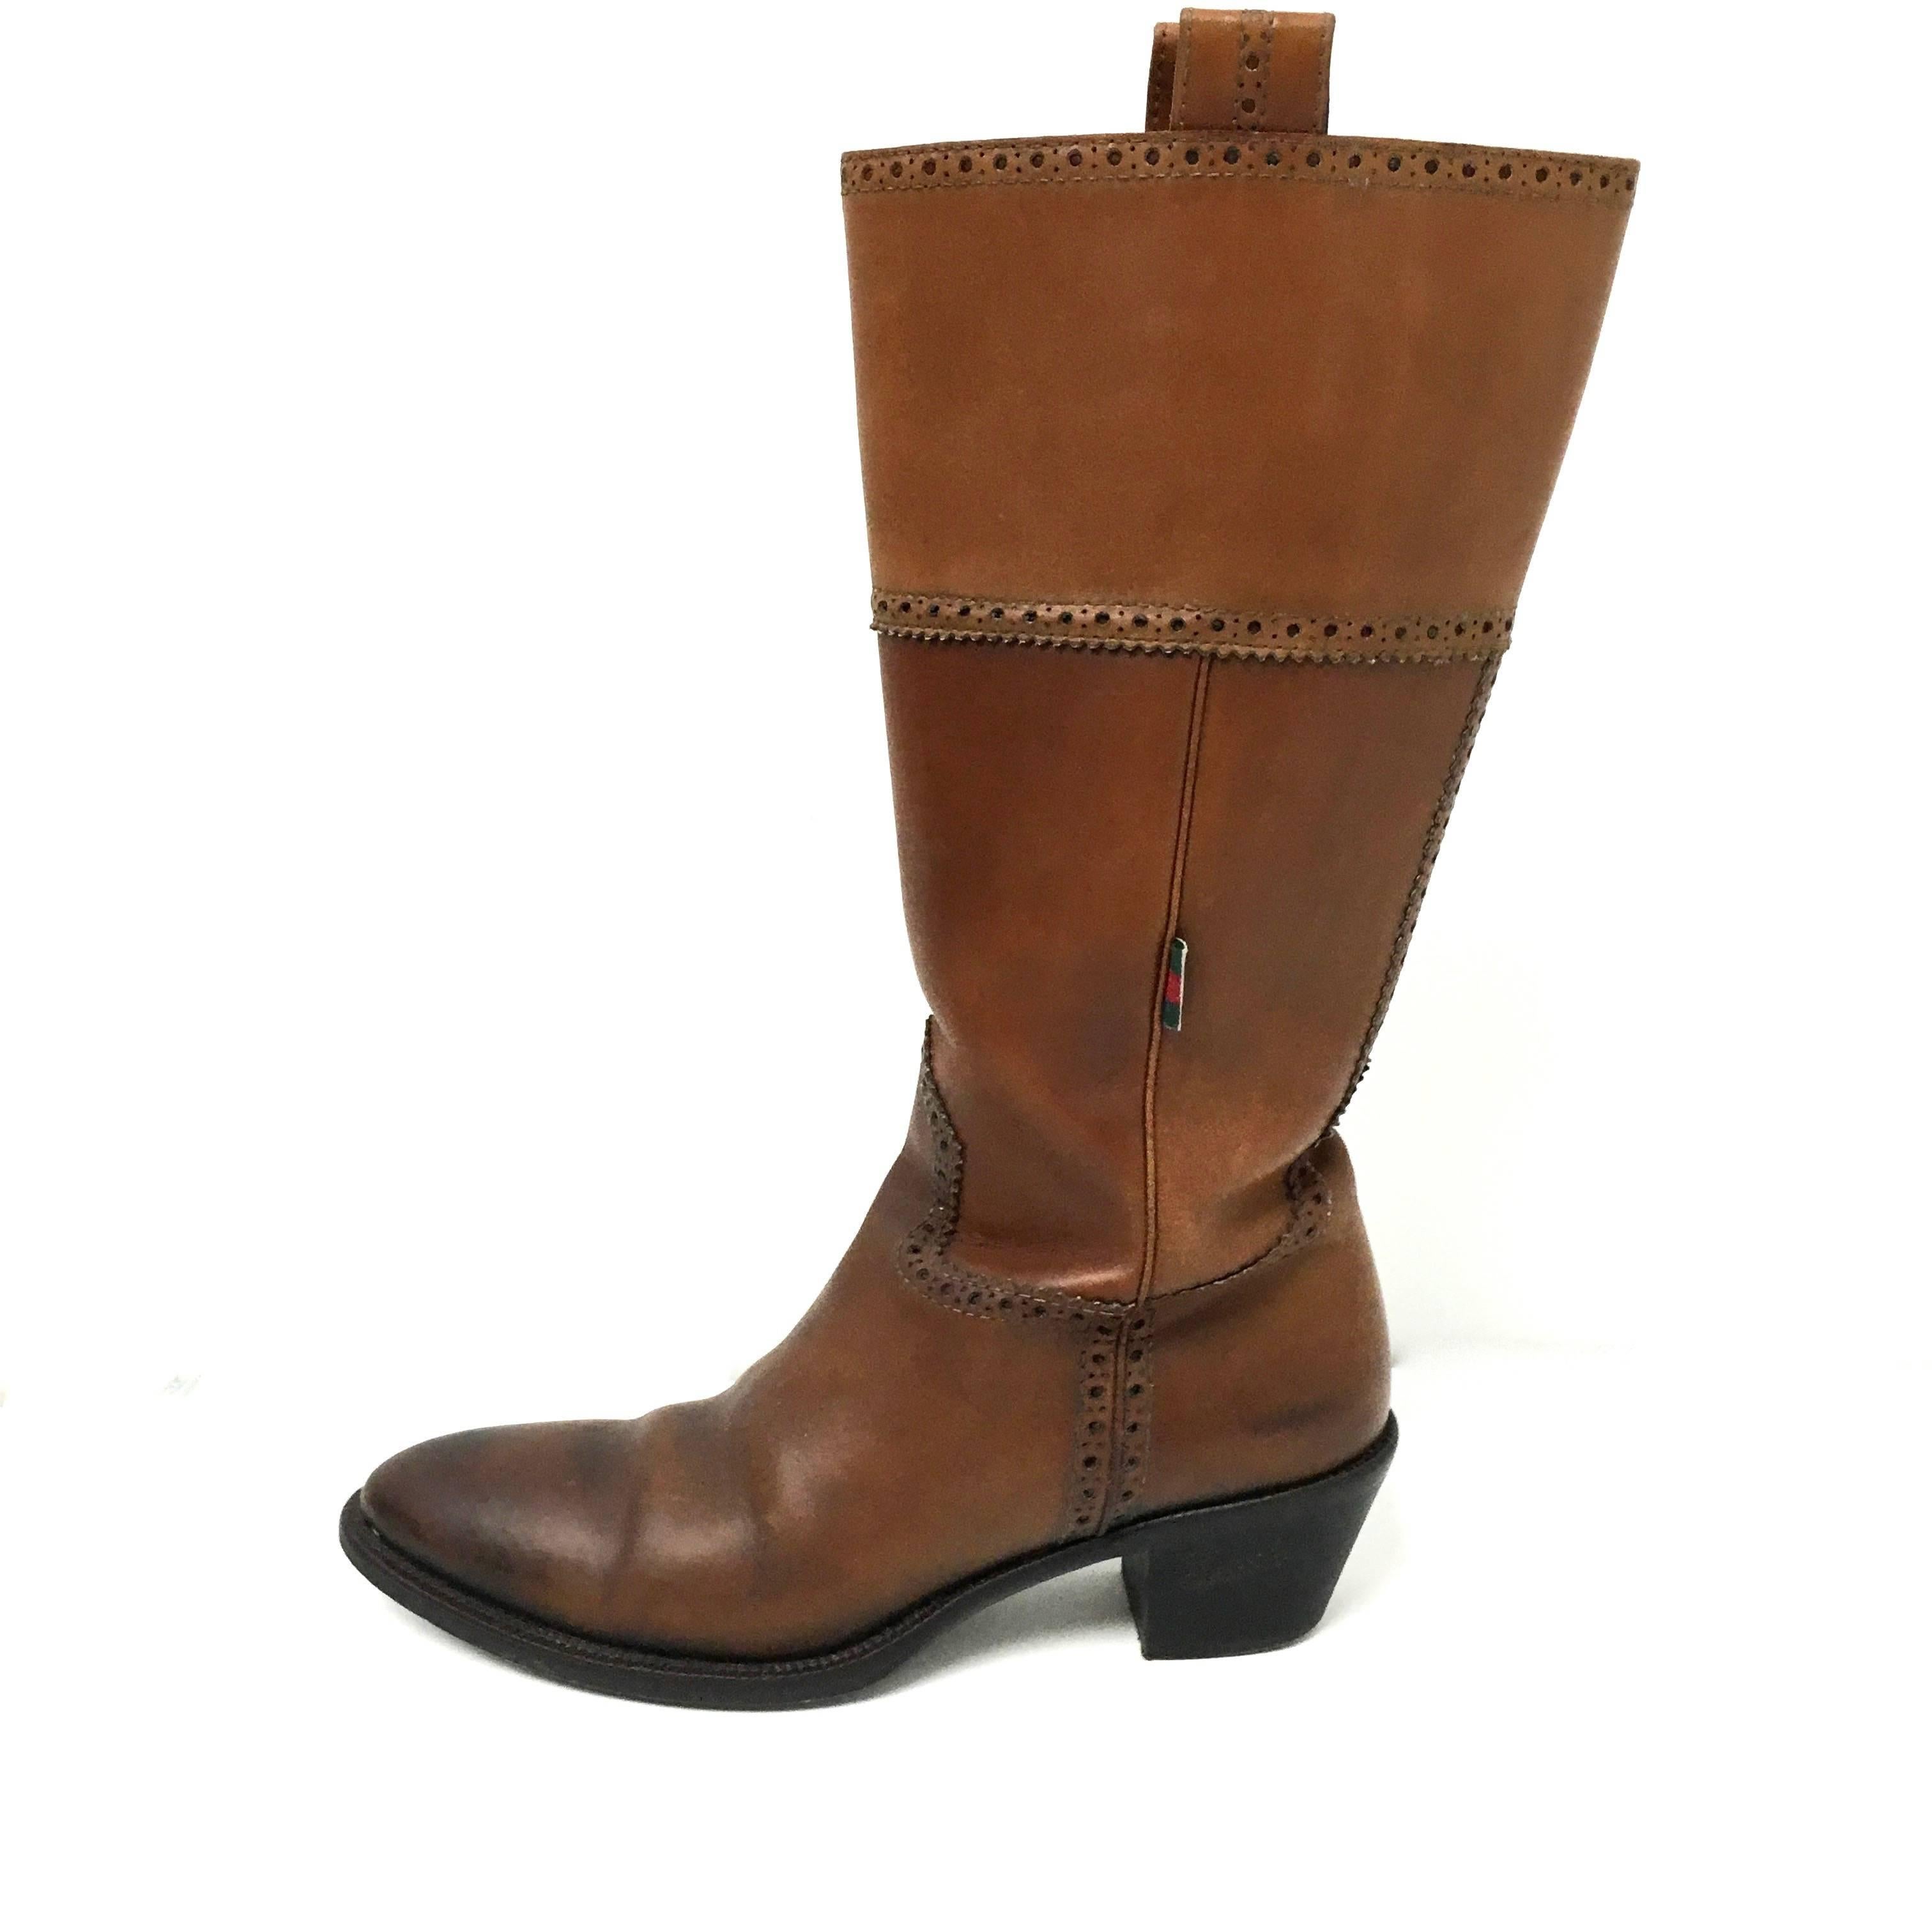 Gucci brown leather cowboy style boots in size 8B (Medium)
Made in Italy
Pull on style.
Measurements:
Sole Length: 10